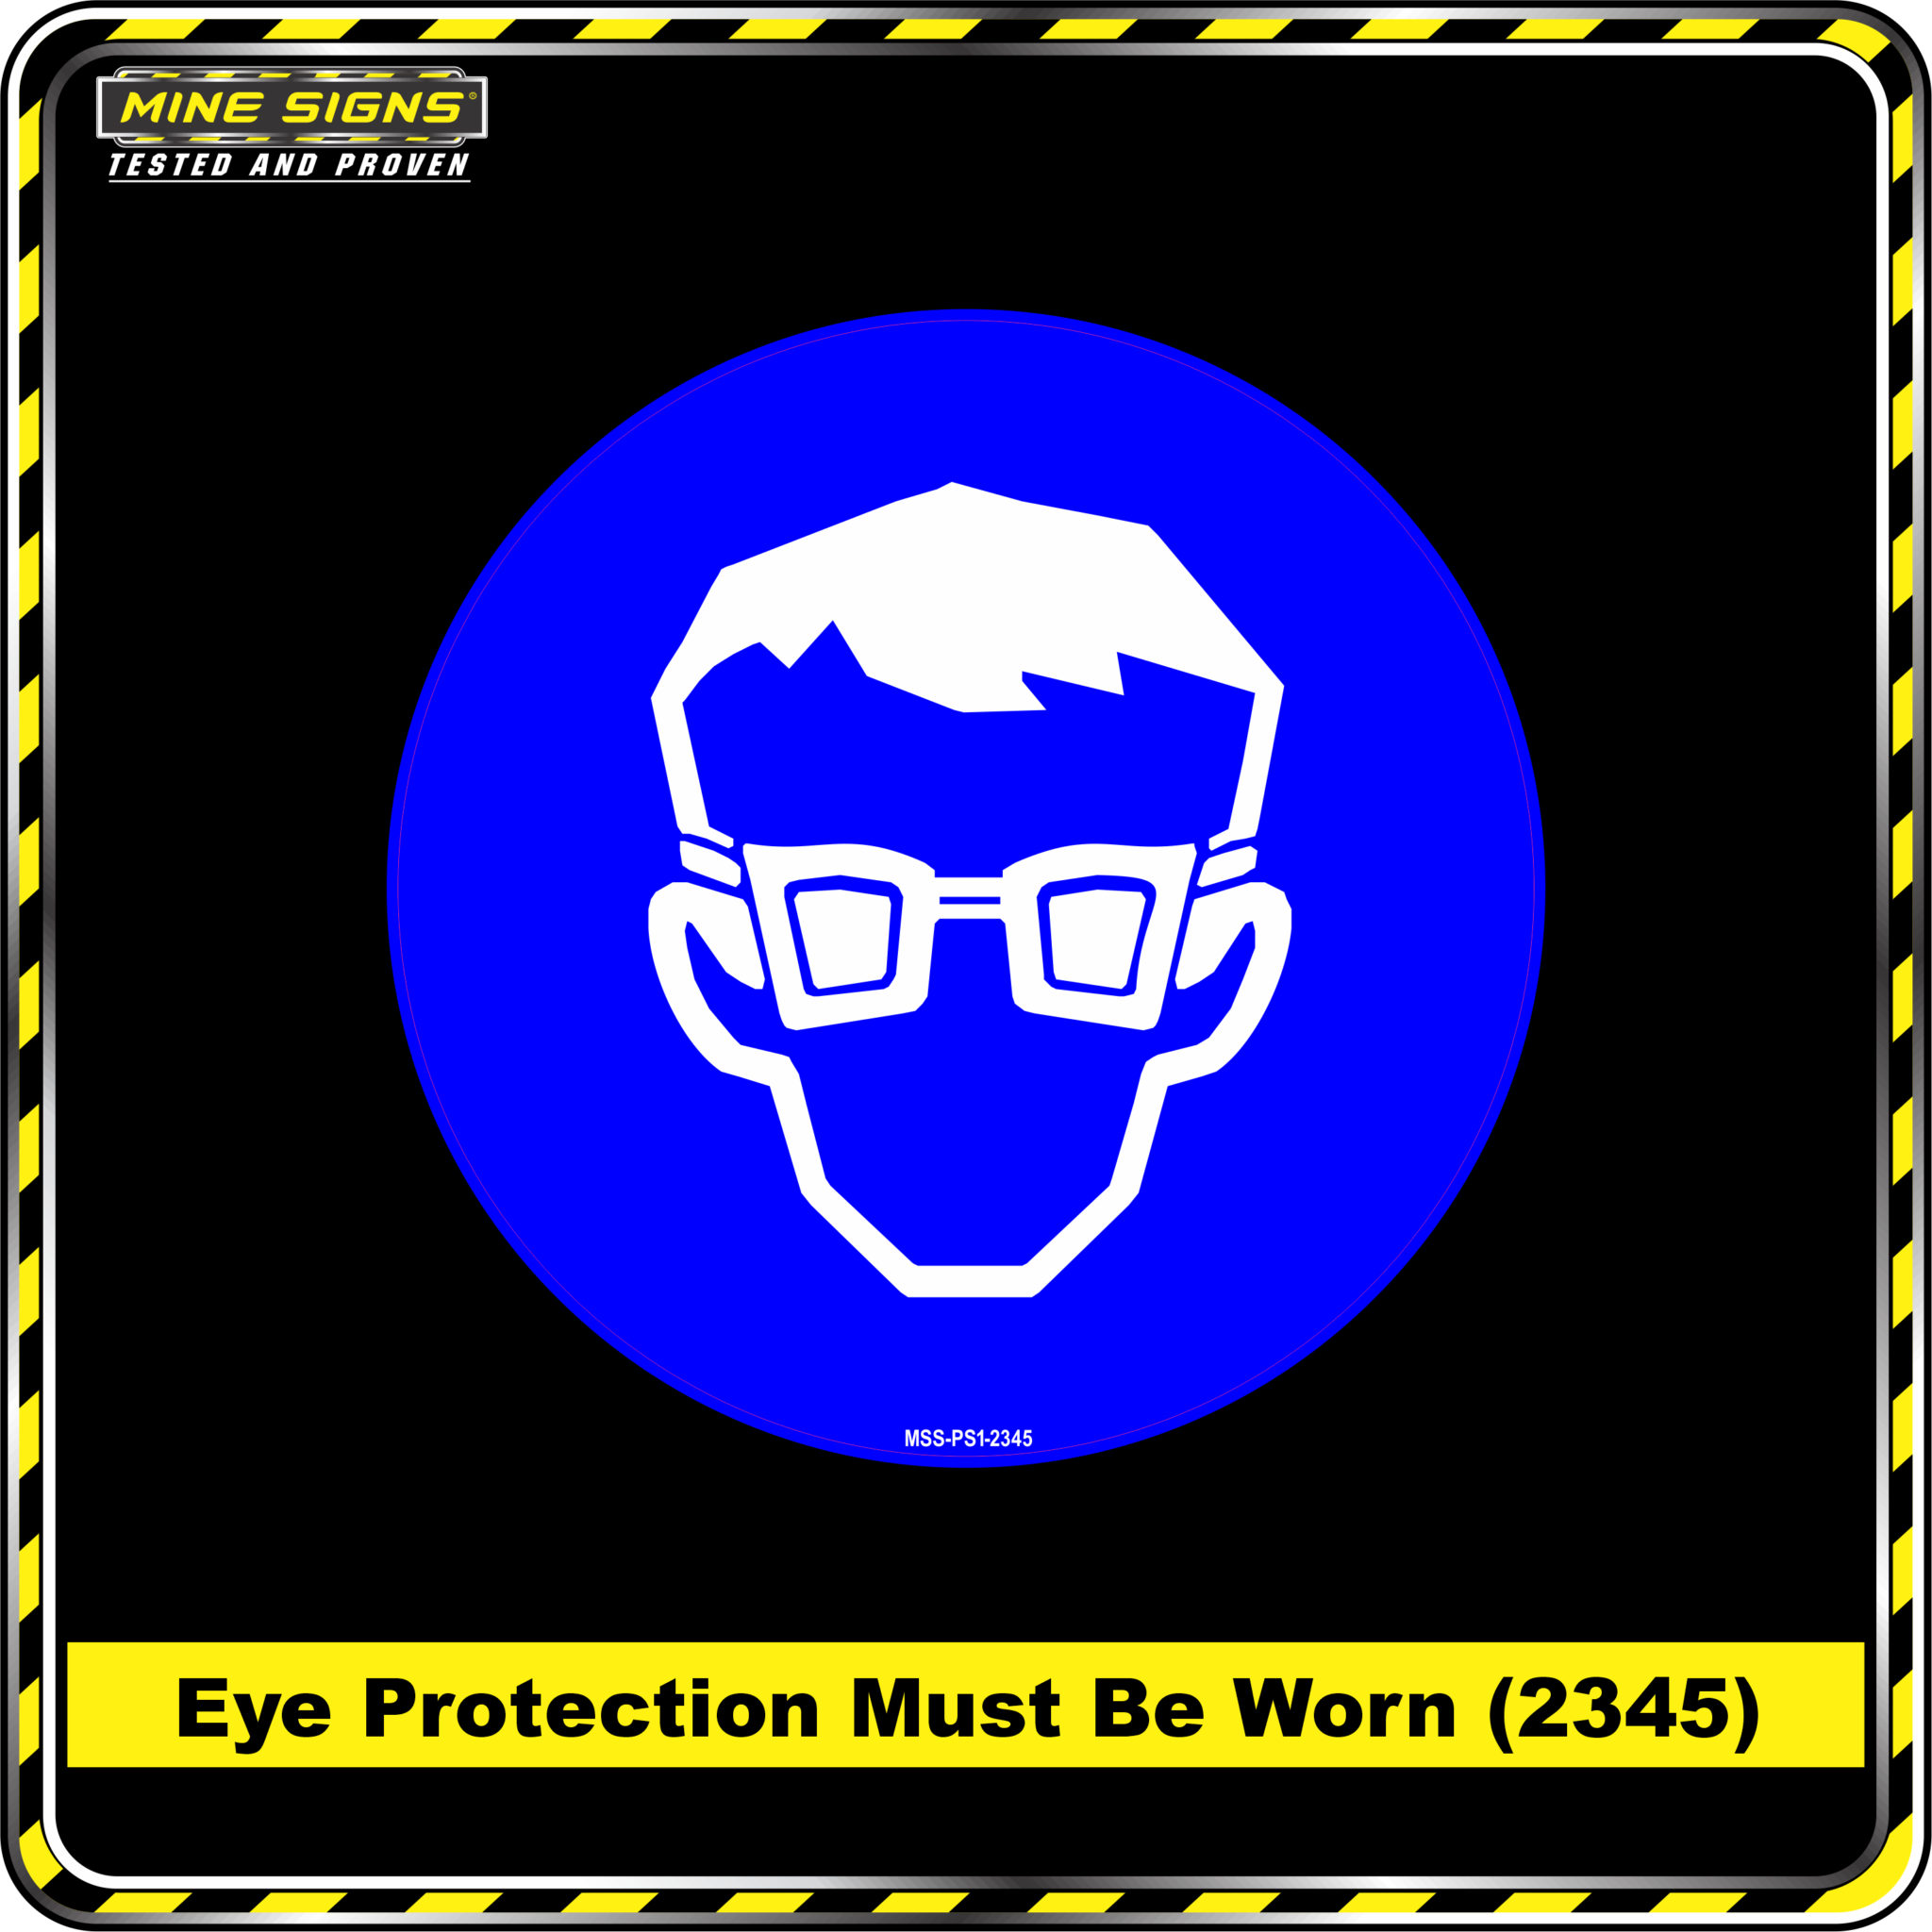 MS - Mandatory Signs - Circles - Eye Protection Must Be Worn - 2345 Safety Glasses